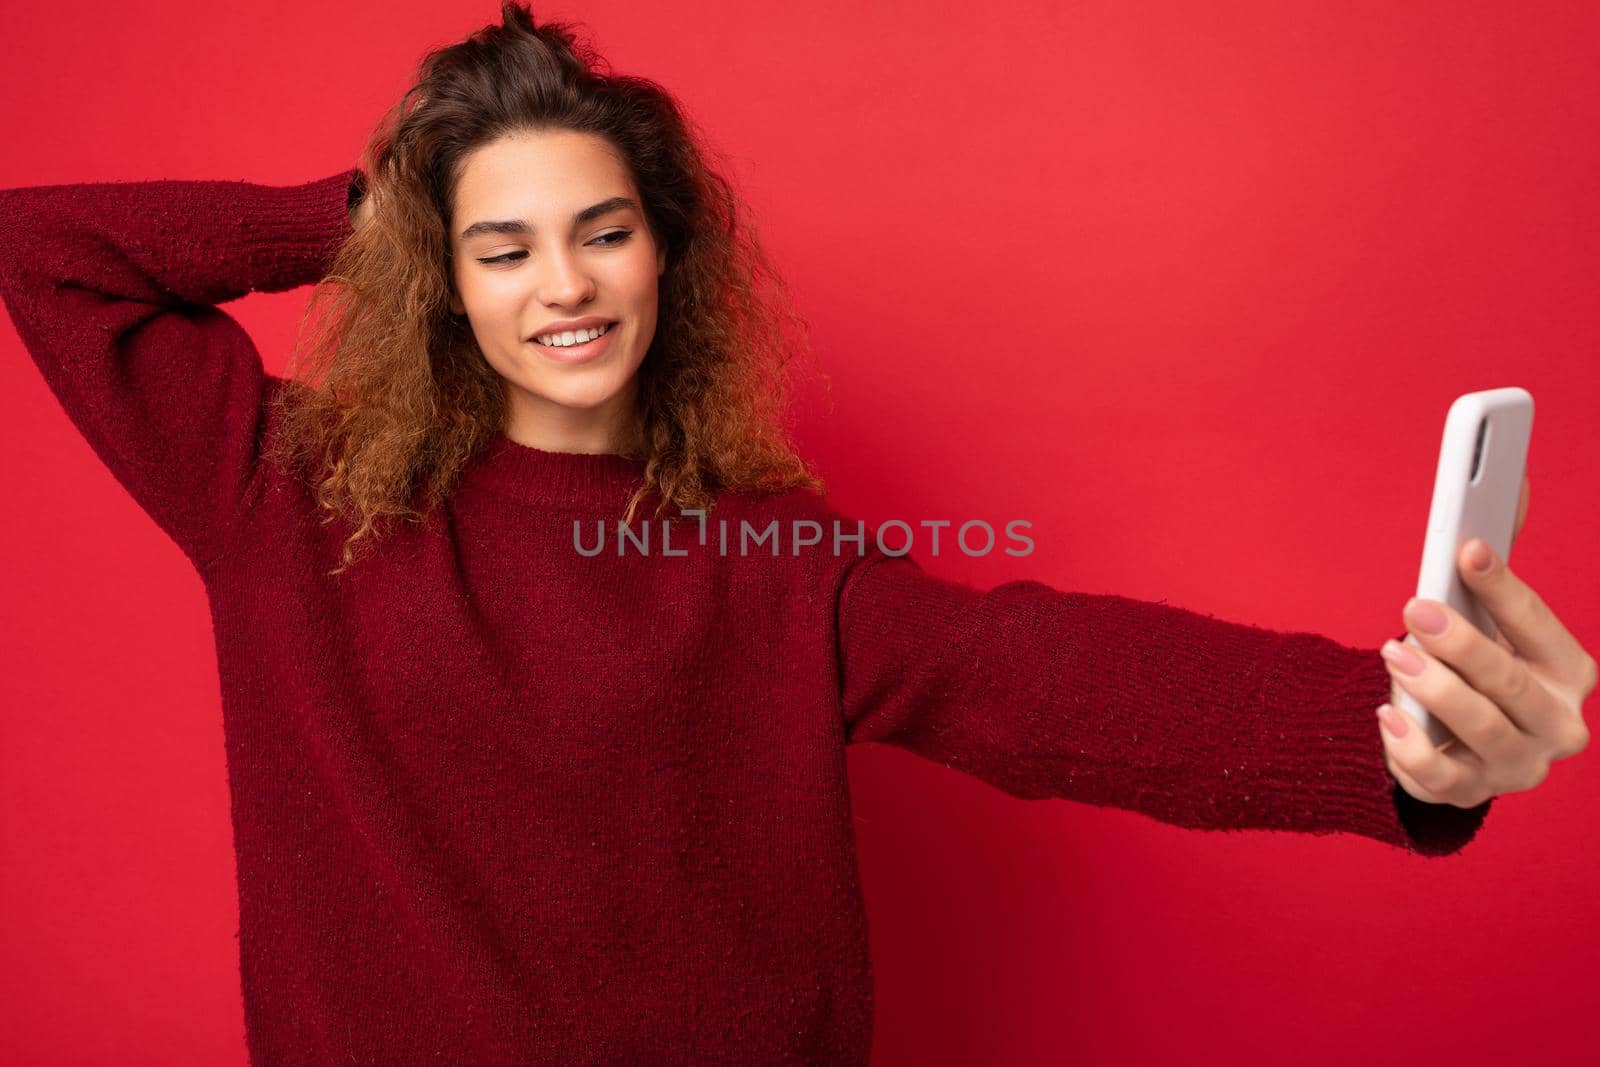 Attractive charming young smiling happy woman holding and using mobile phone taking selfie wearing stylish clothes isolated over wall background.